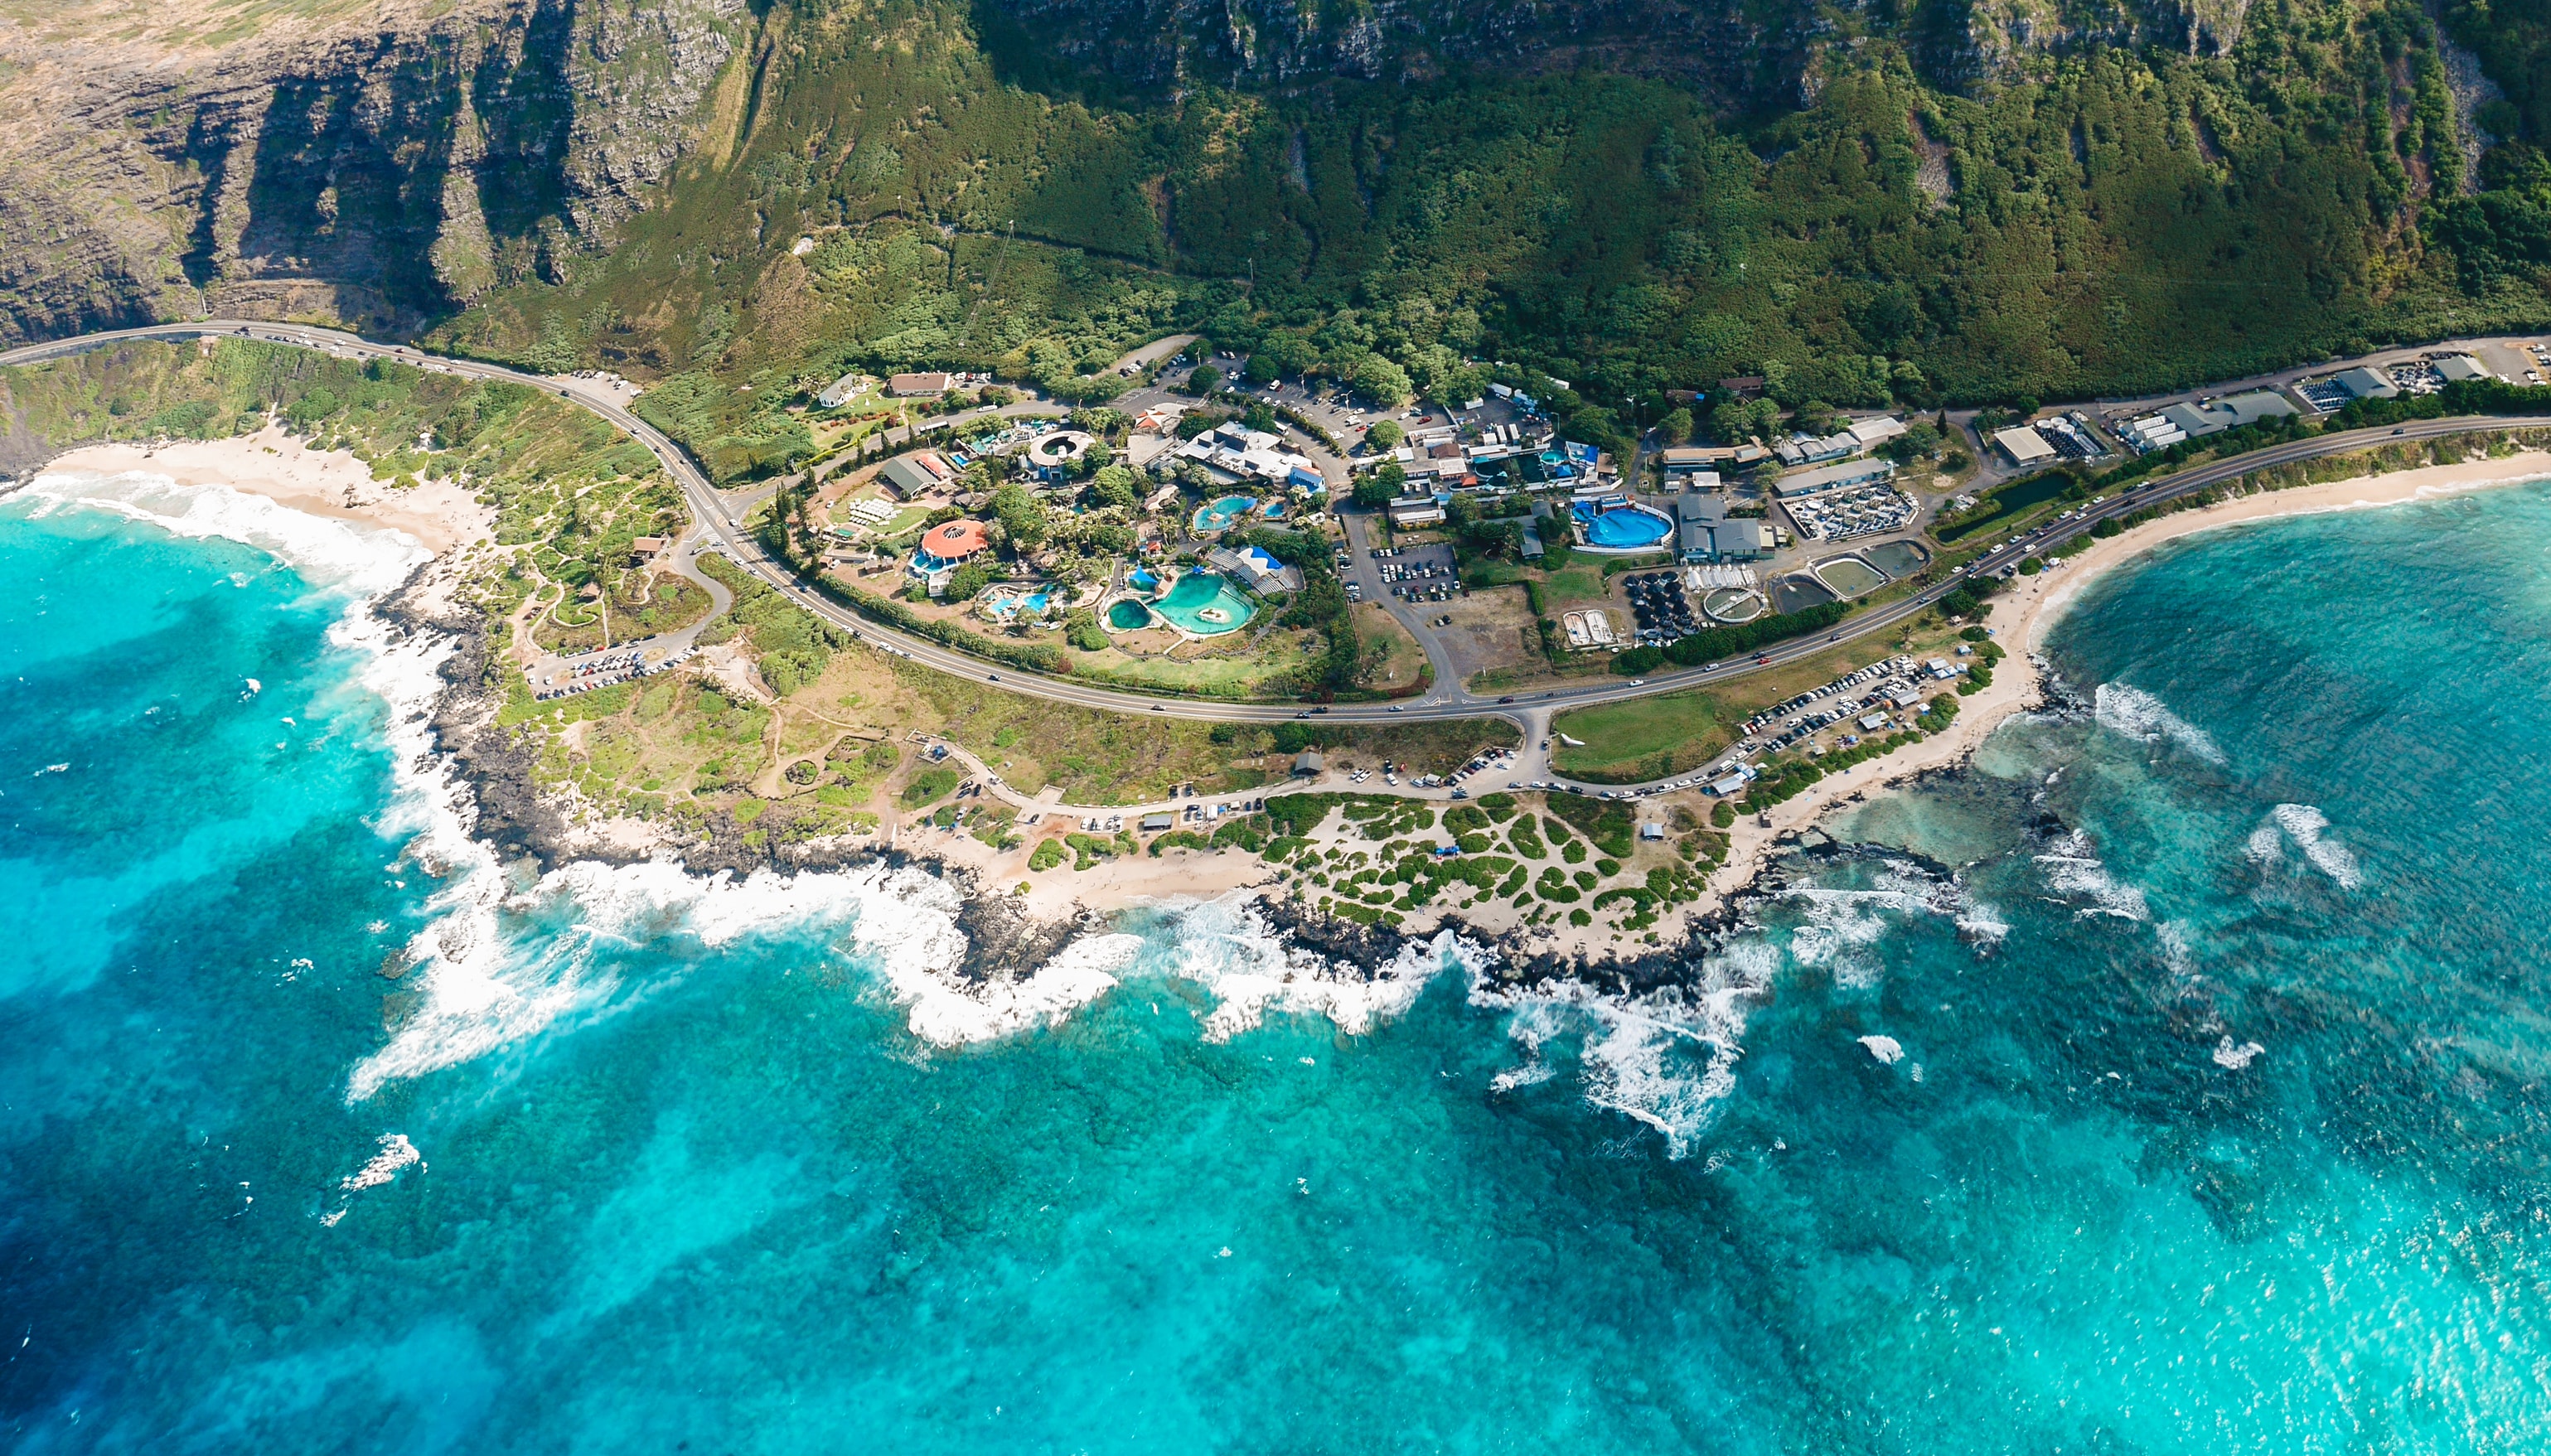 Drone shot of the turtle bay resort that shows the resort, ocean, and mountains